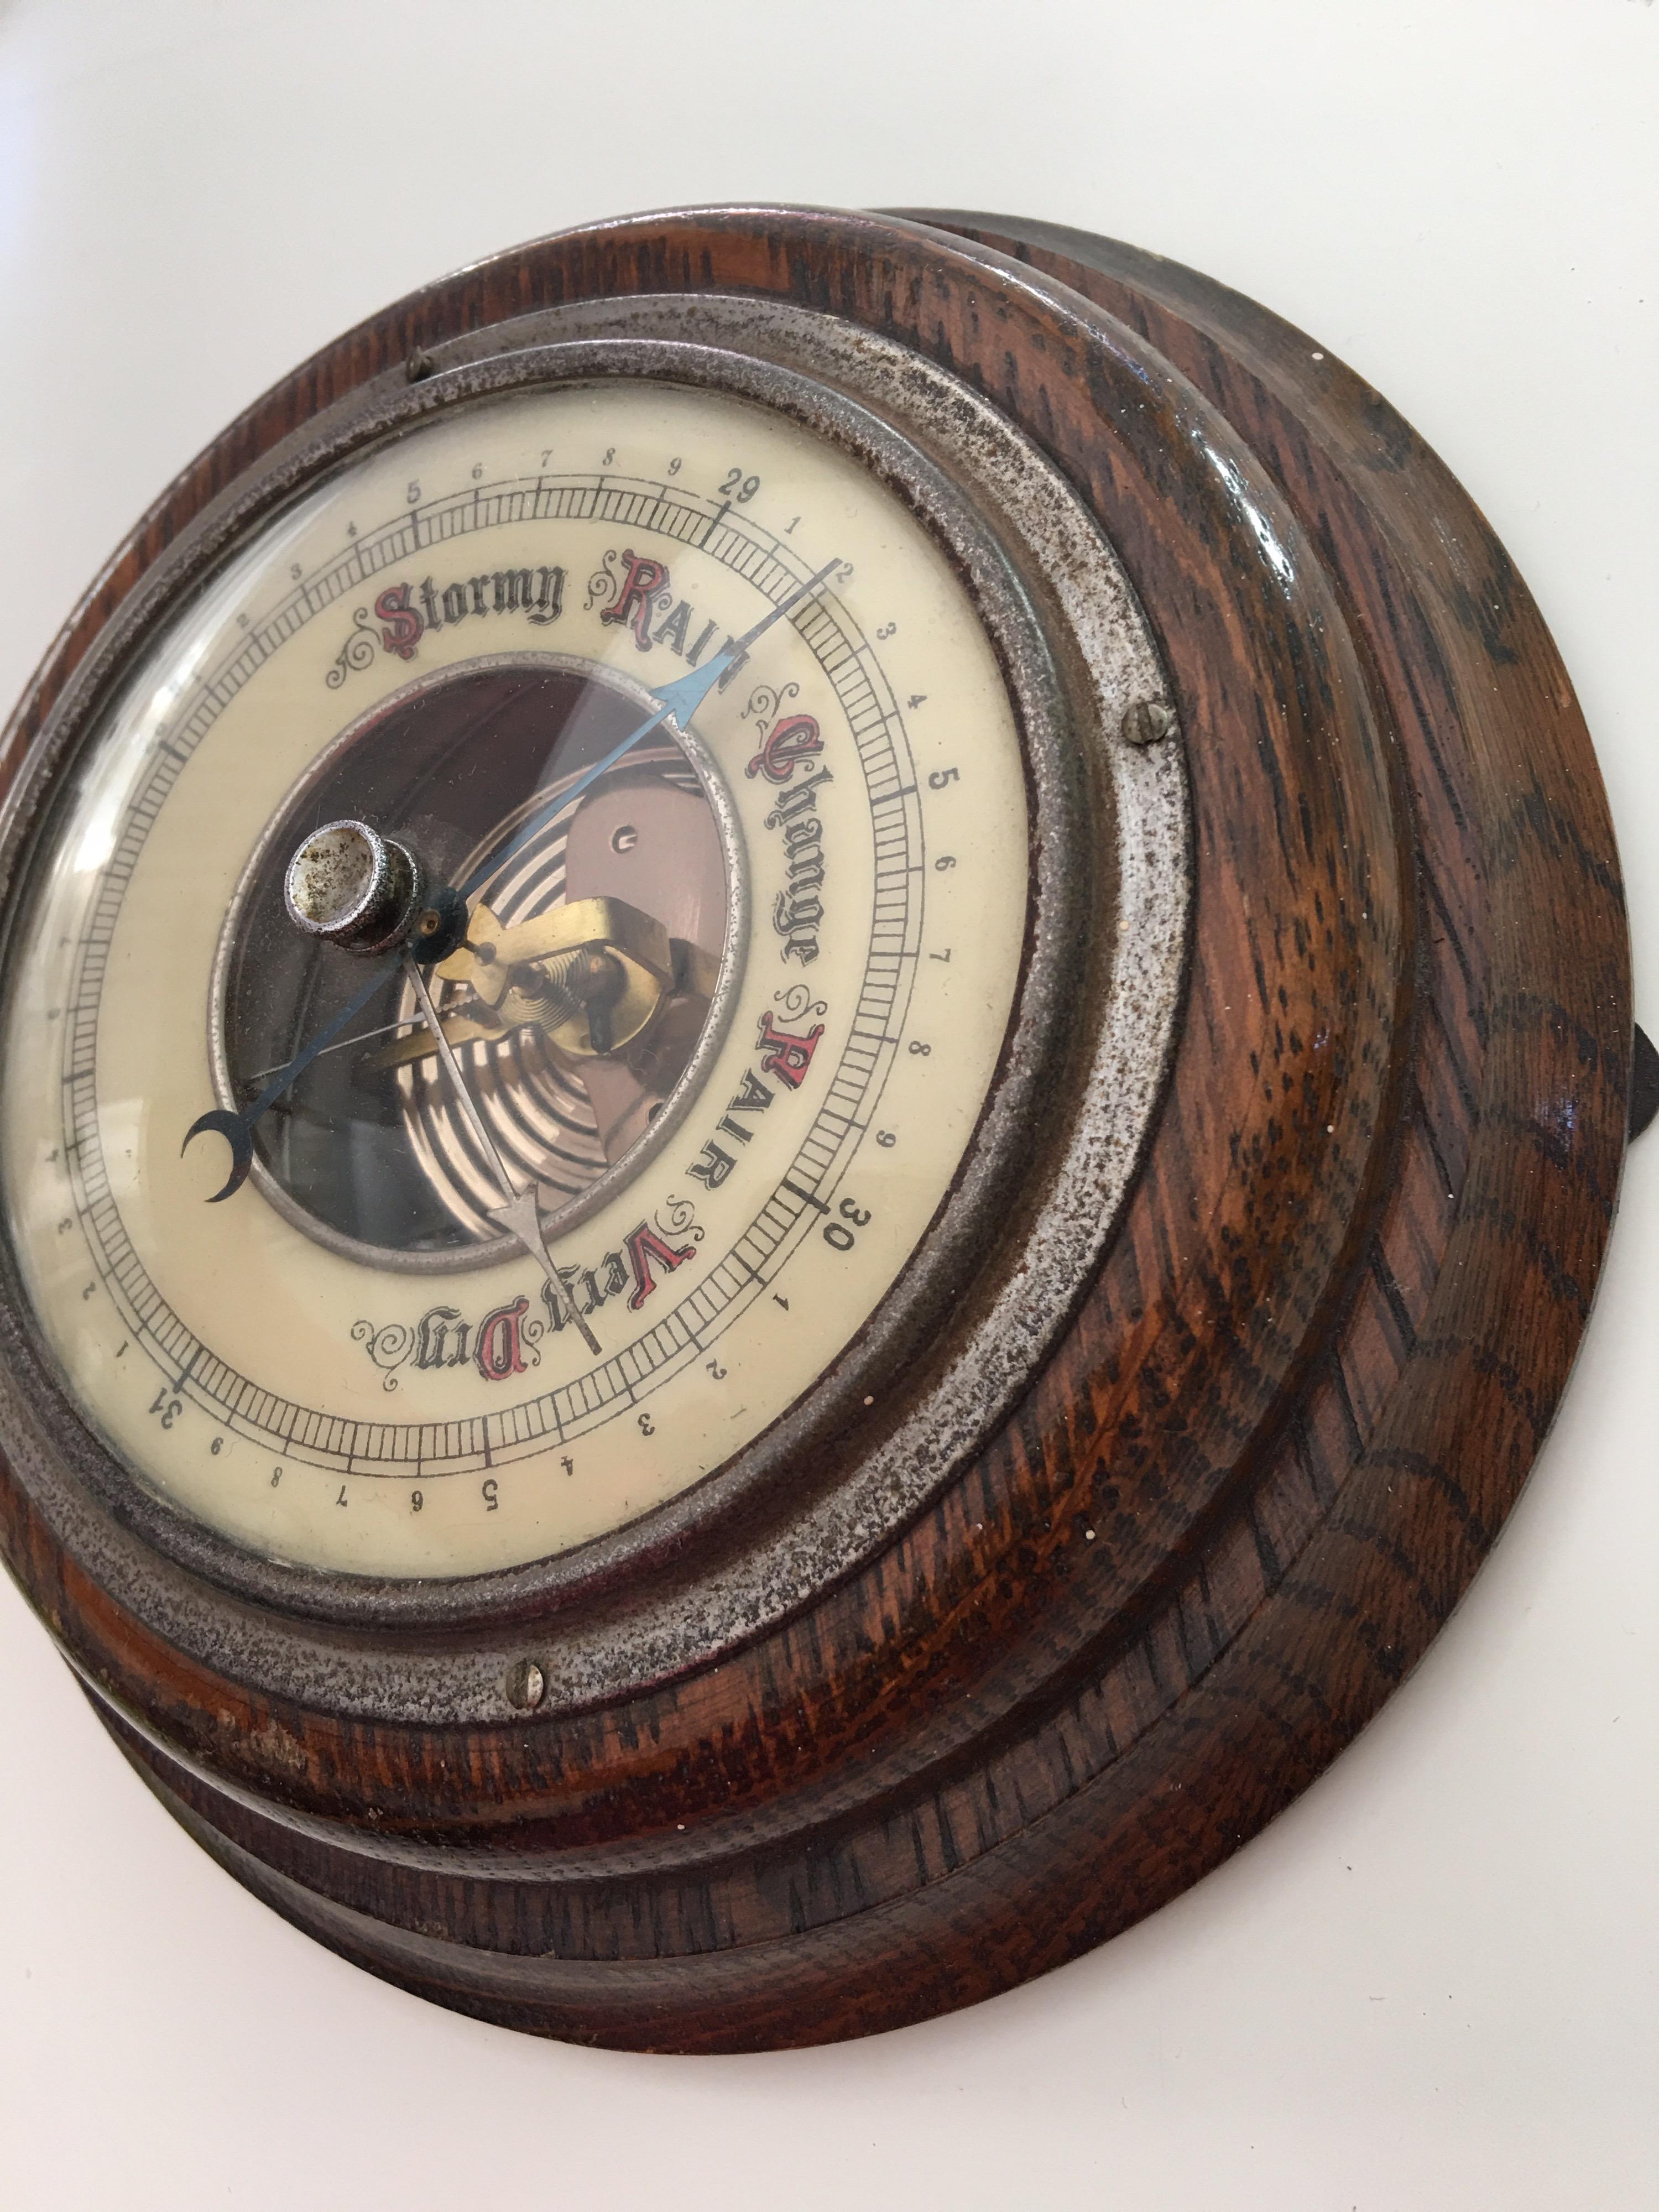 This beautiful antique barometer is in good working condition. Please study the images carefully as form part of the description.